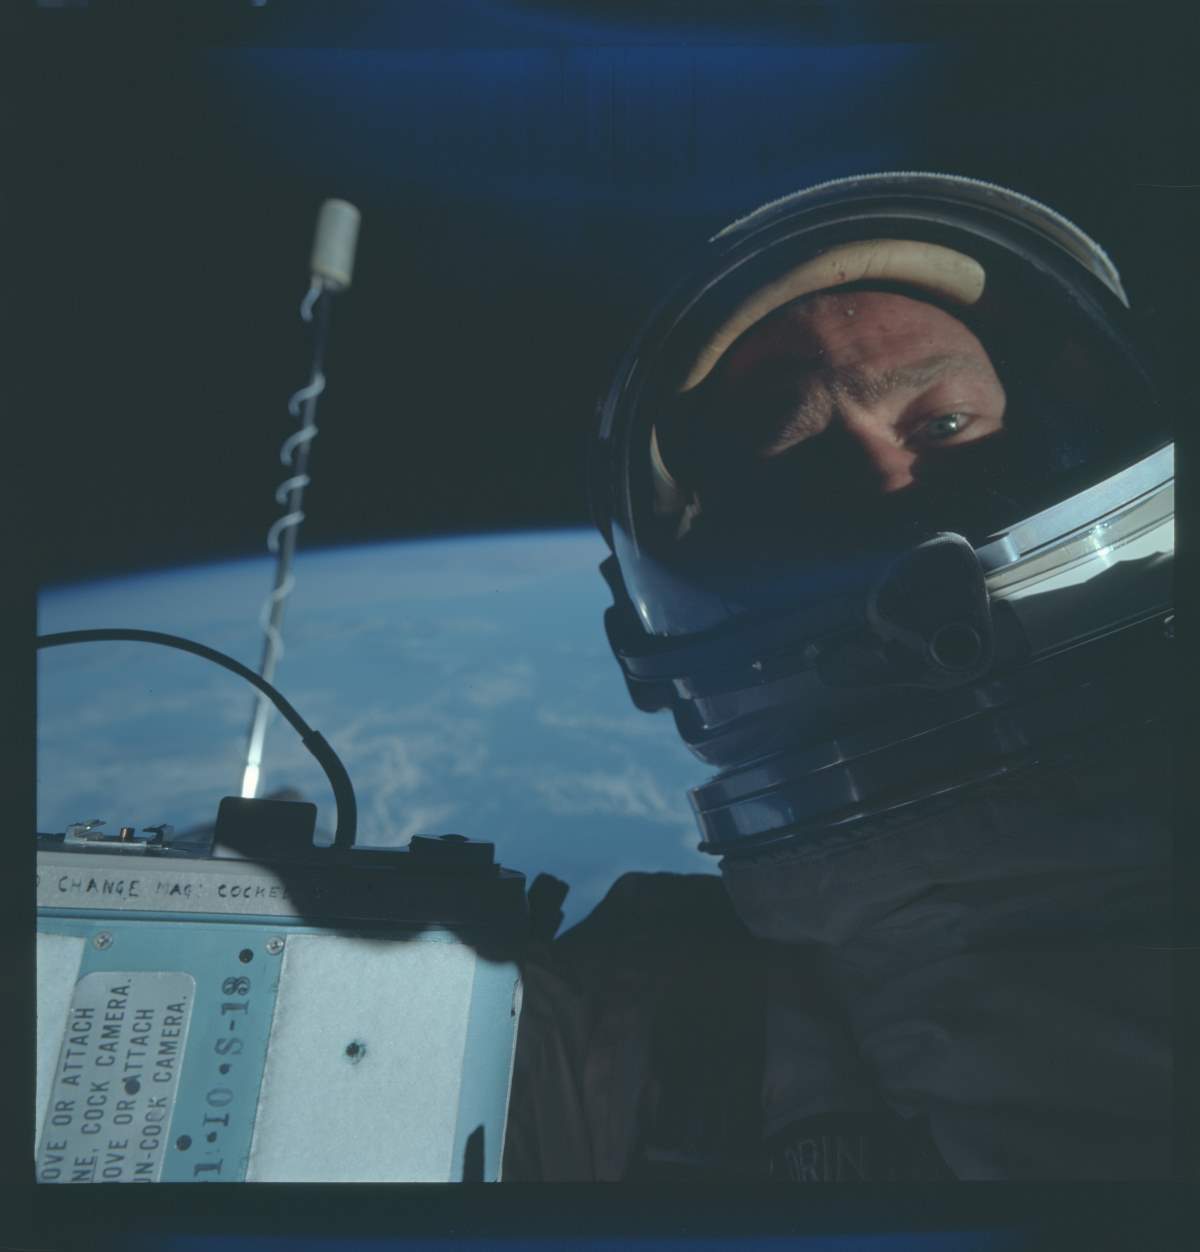 Buzz Aldrin selfie during the Gemini 12 Mission